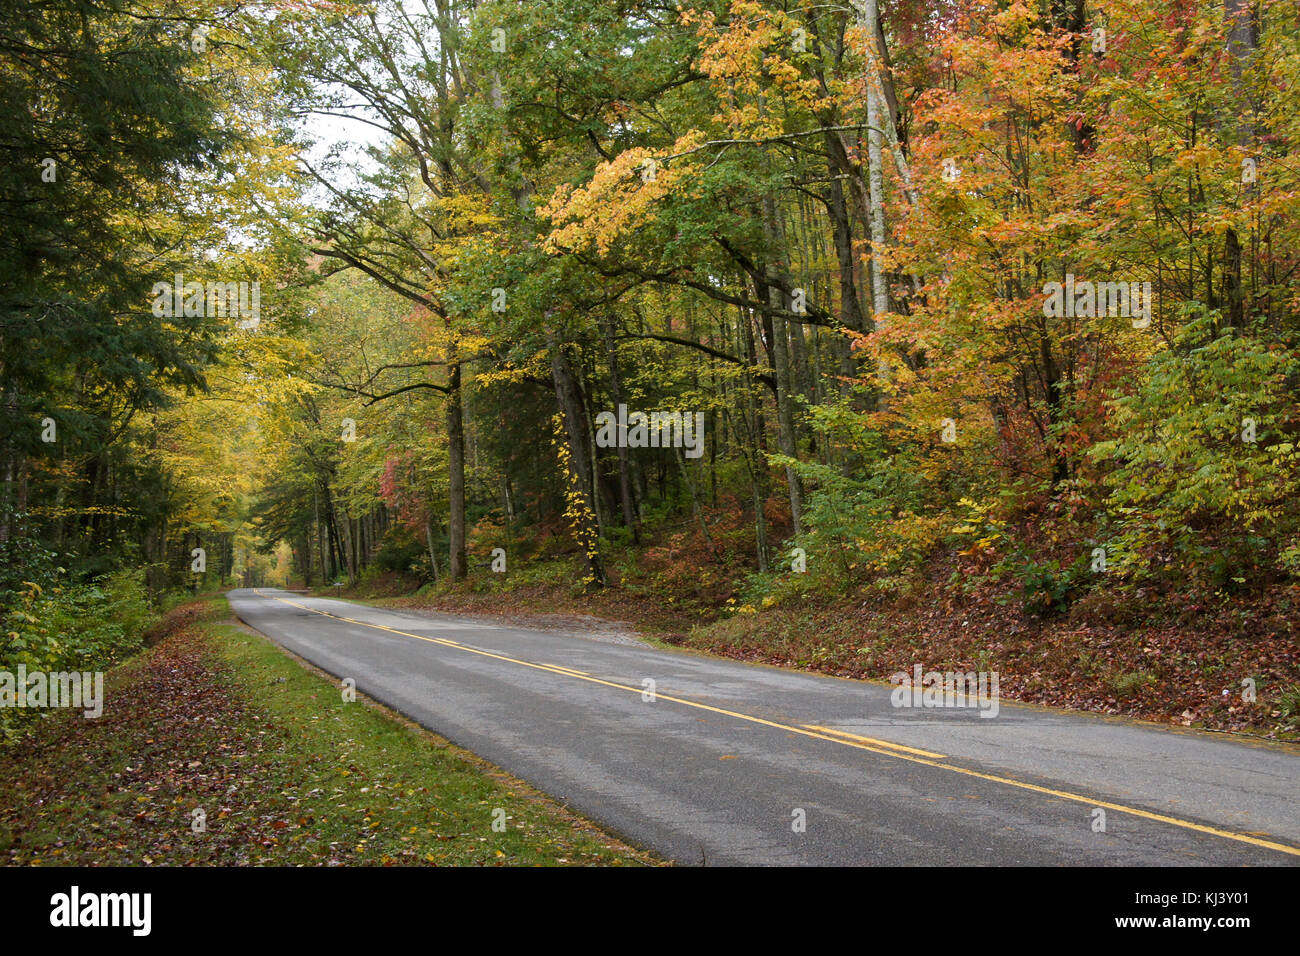 Autumn foliage along Little River Road, Great Smoky Mountains National Park, Tennessee Stock Photo